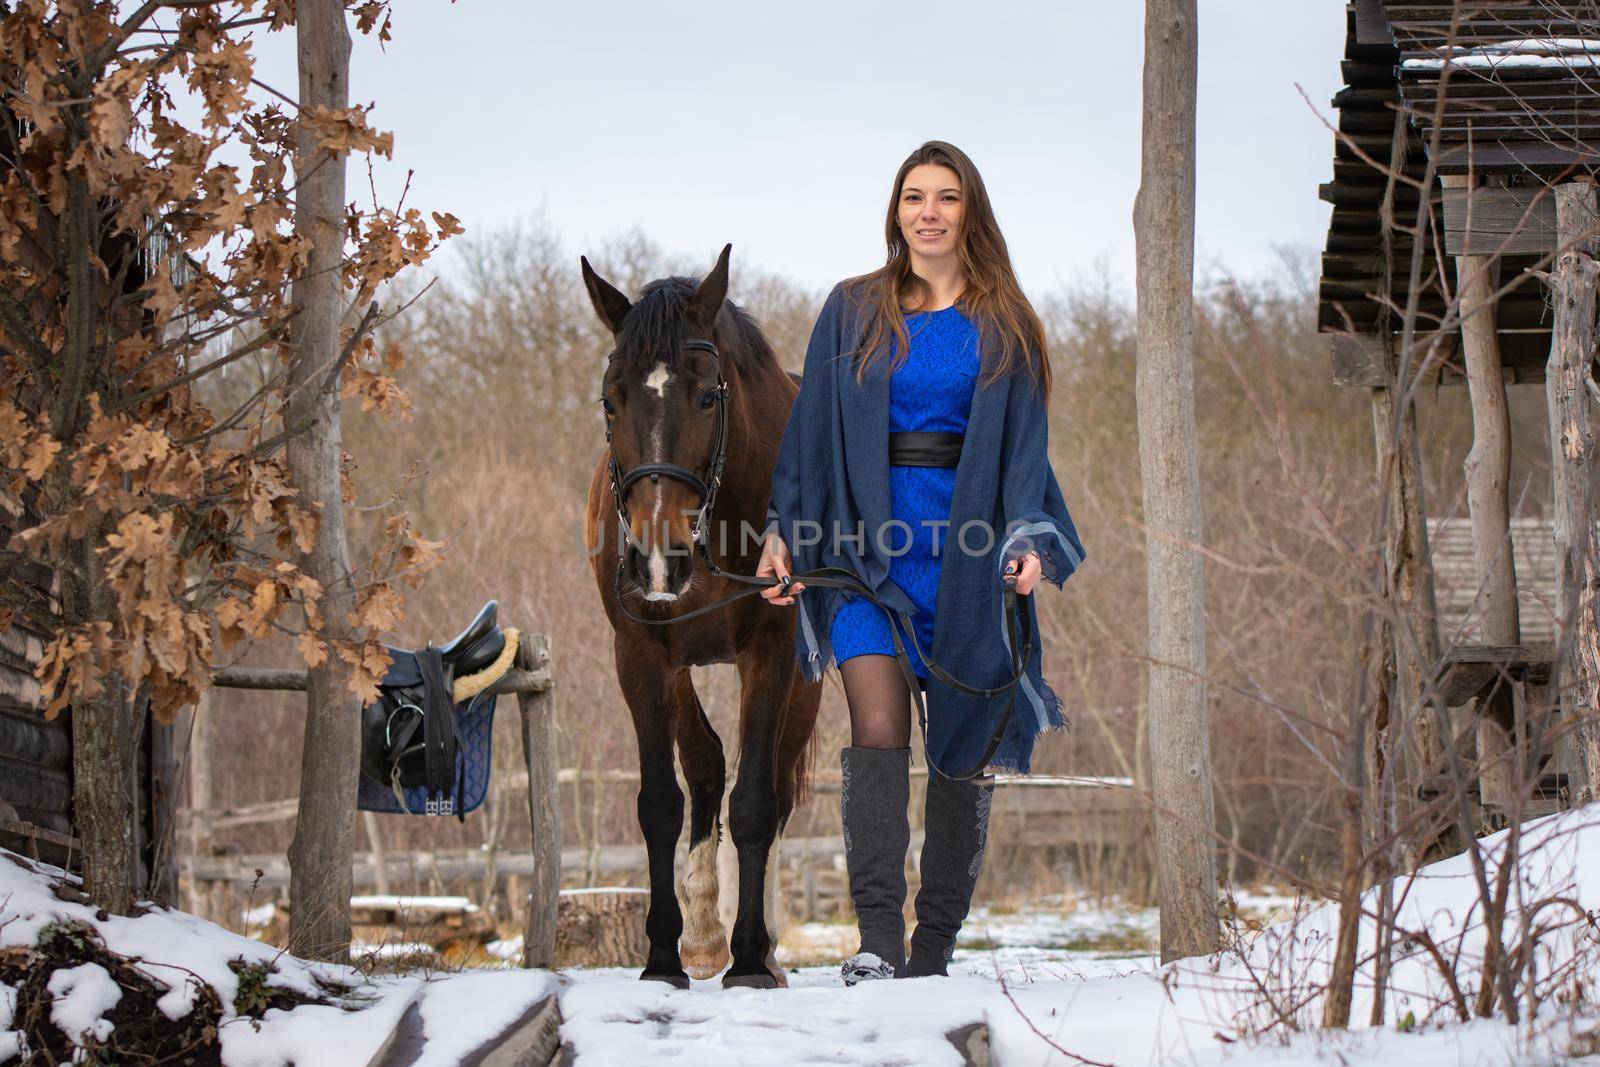 A girl in a blue dress walks with a horse through the winter forest and old wooden ruins